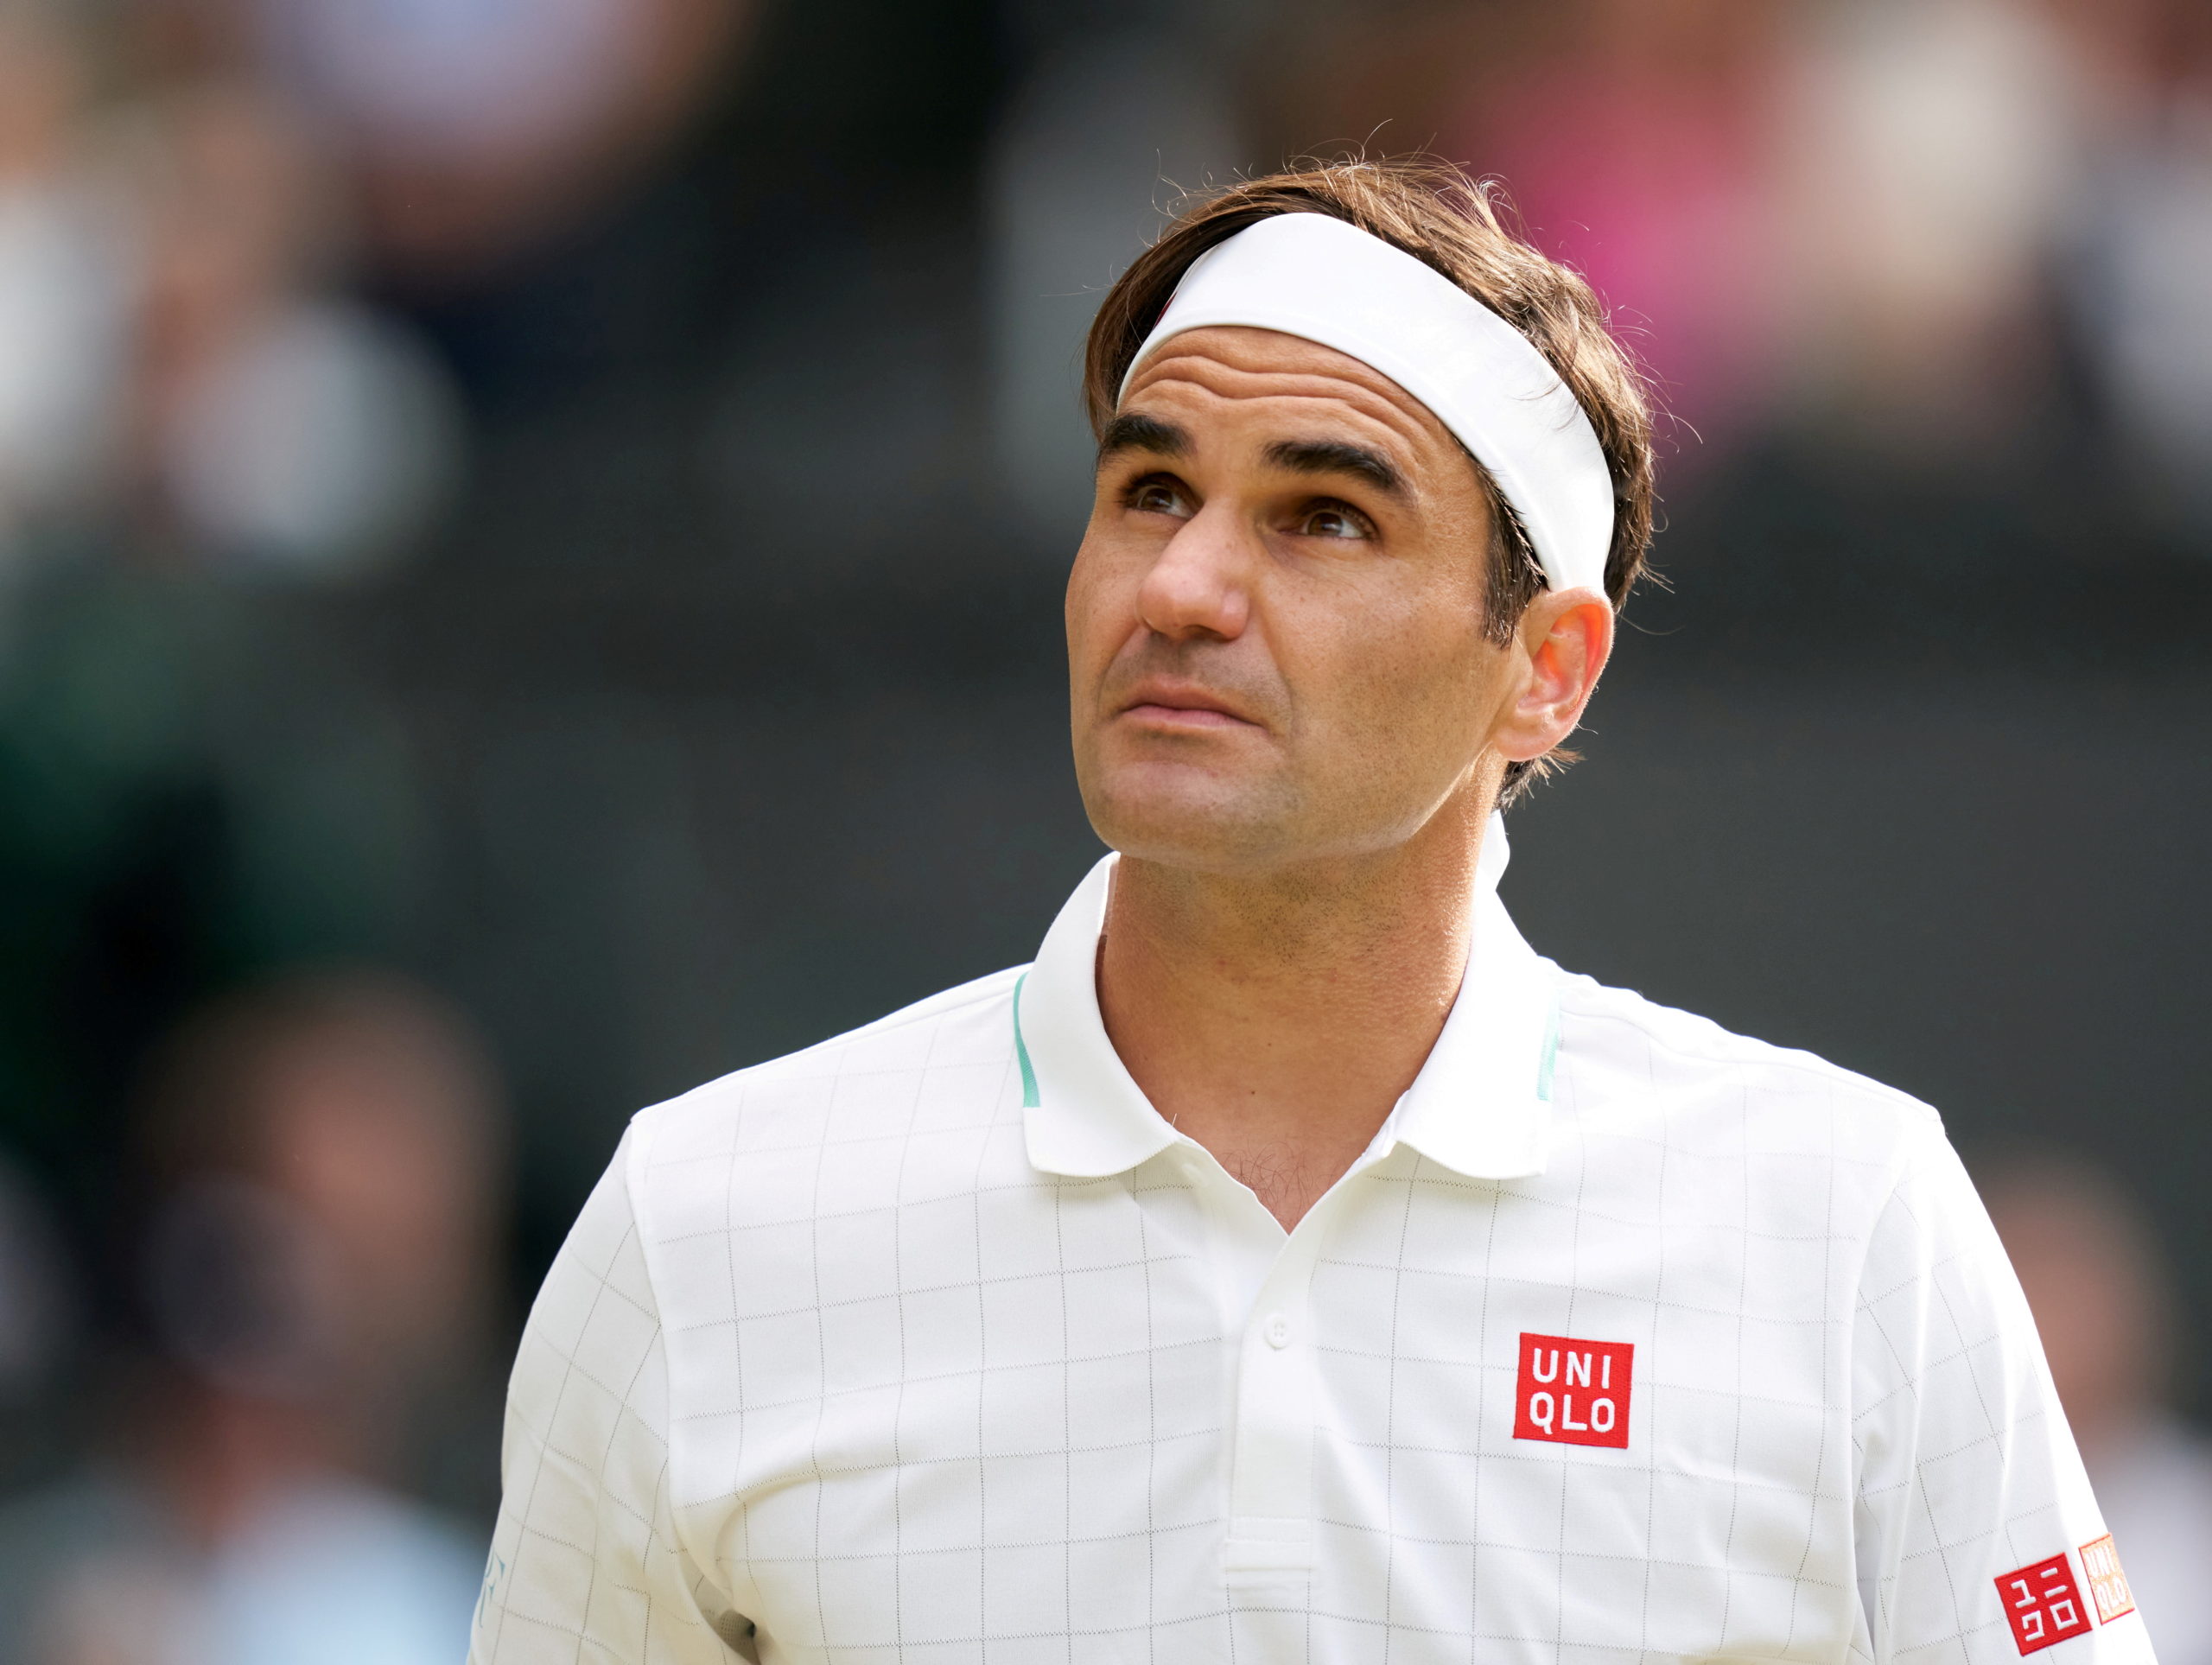 Roger Federer (SUI) plays against Hubert Hurkacz (POL) in the quarter finals at All England Lawn Tennis and Croquet Club. Mandatory Credit: Peter van den Berg-USA TODAY Sports/File Photo